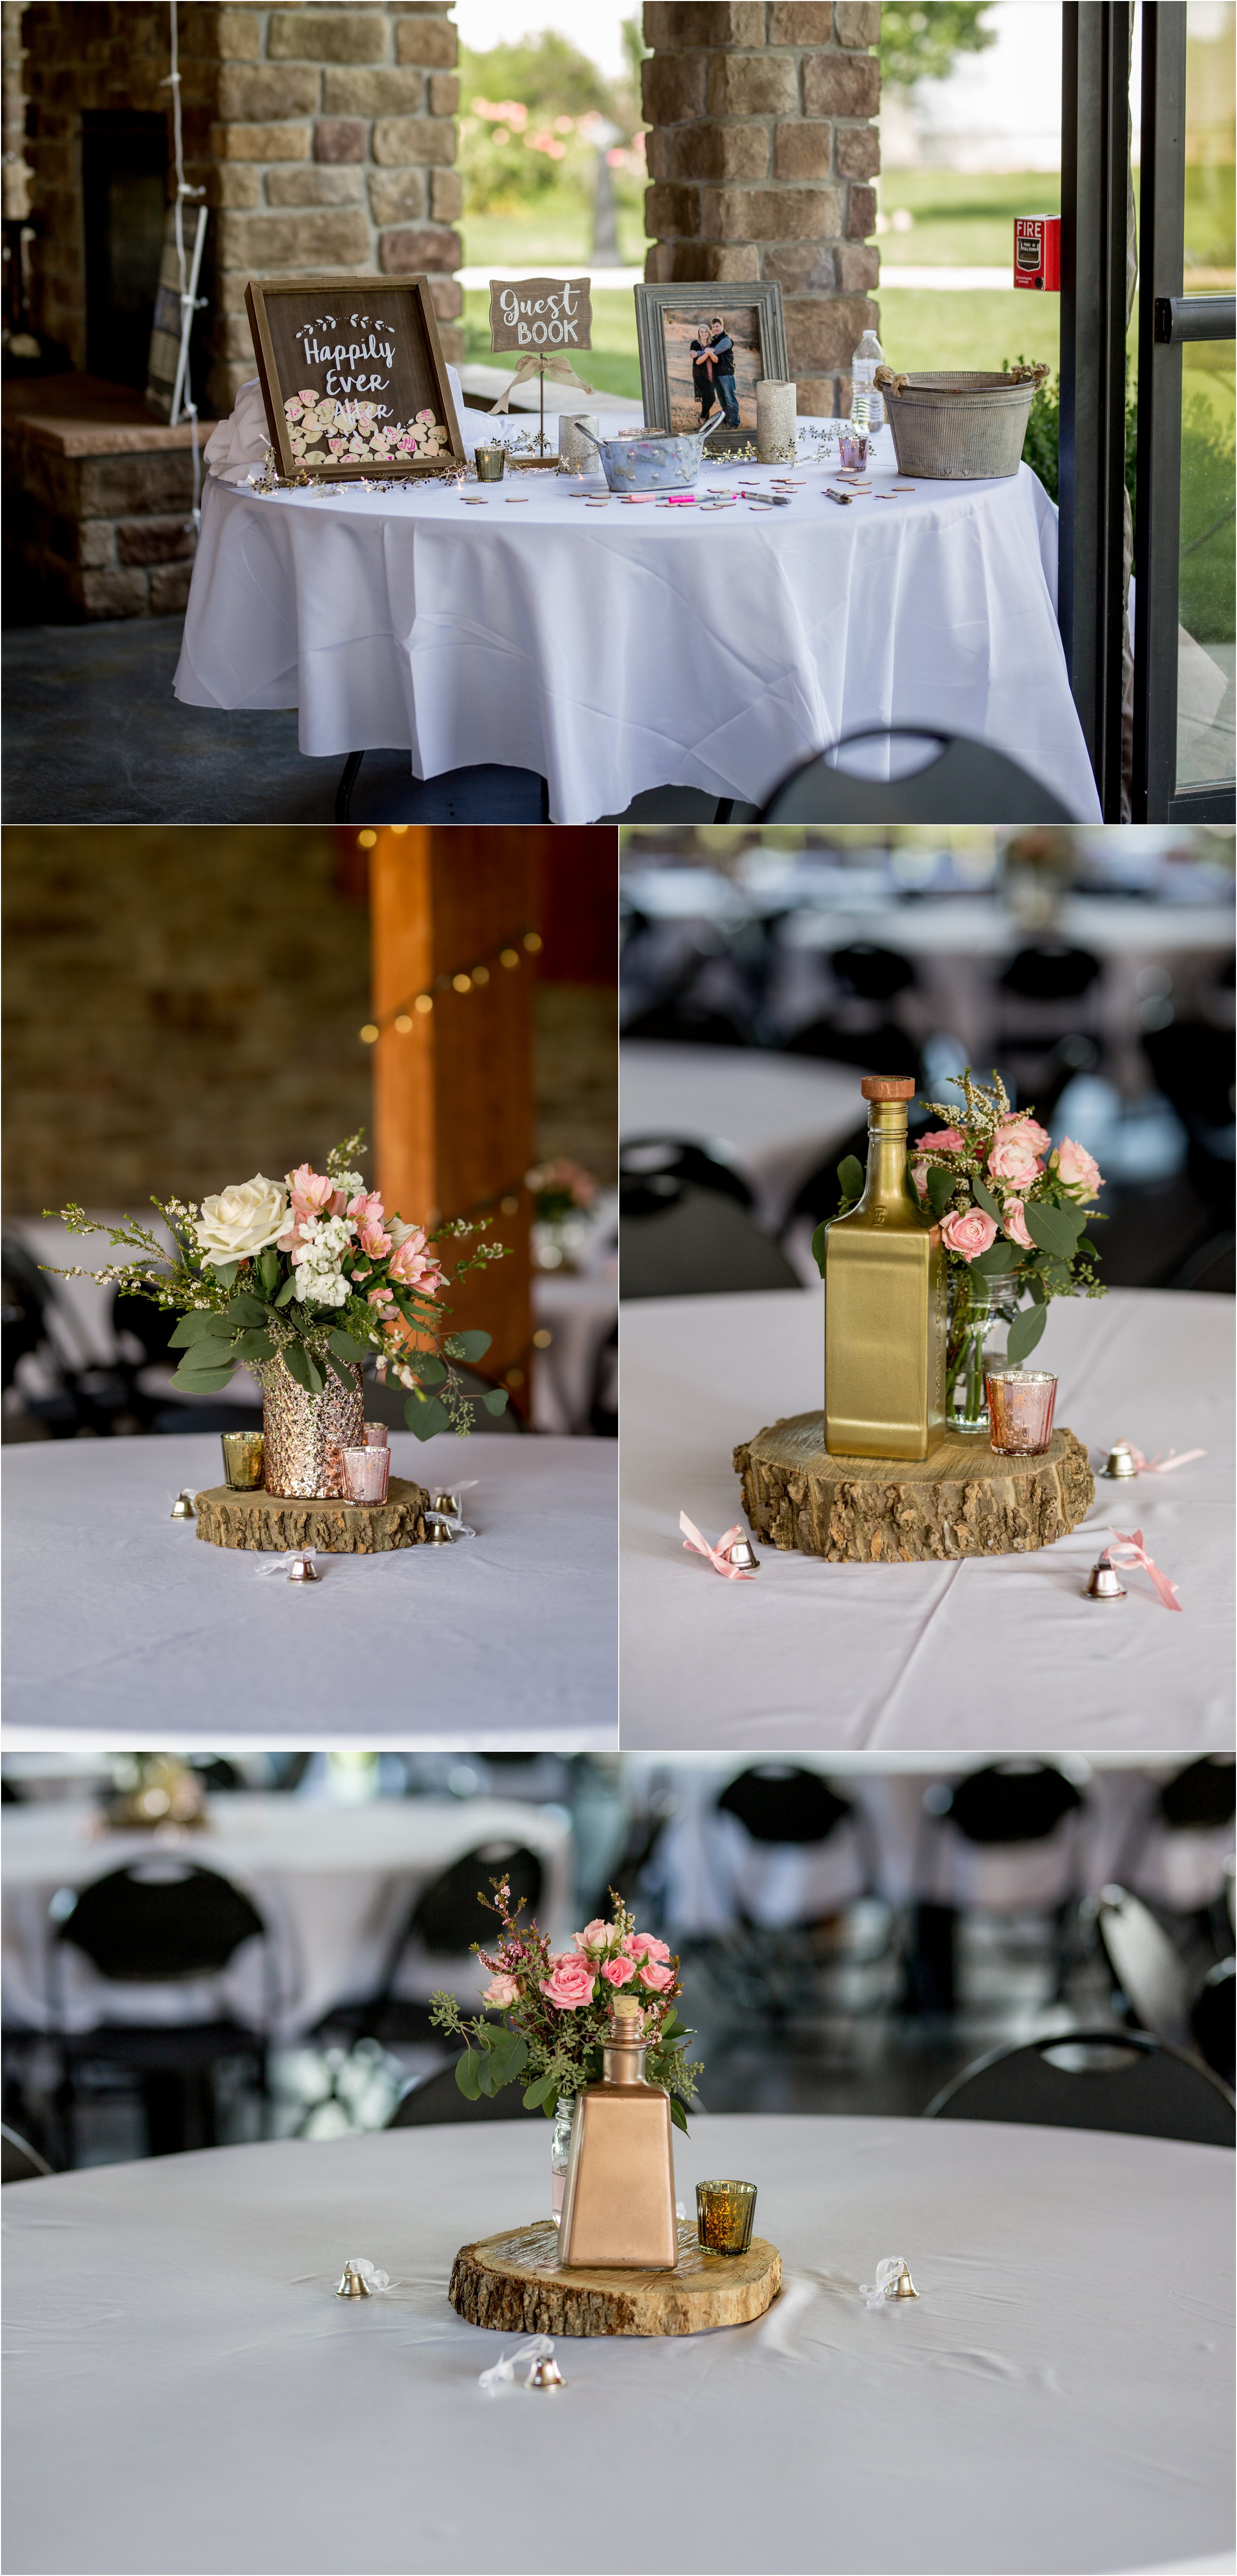 reception decor including pink and white flowers and guestbook decor